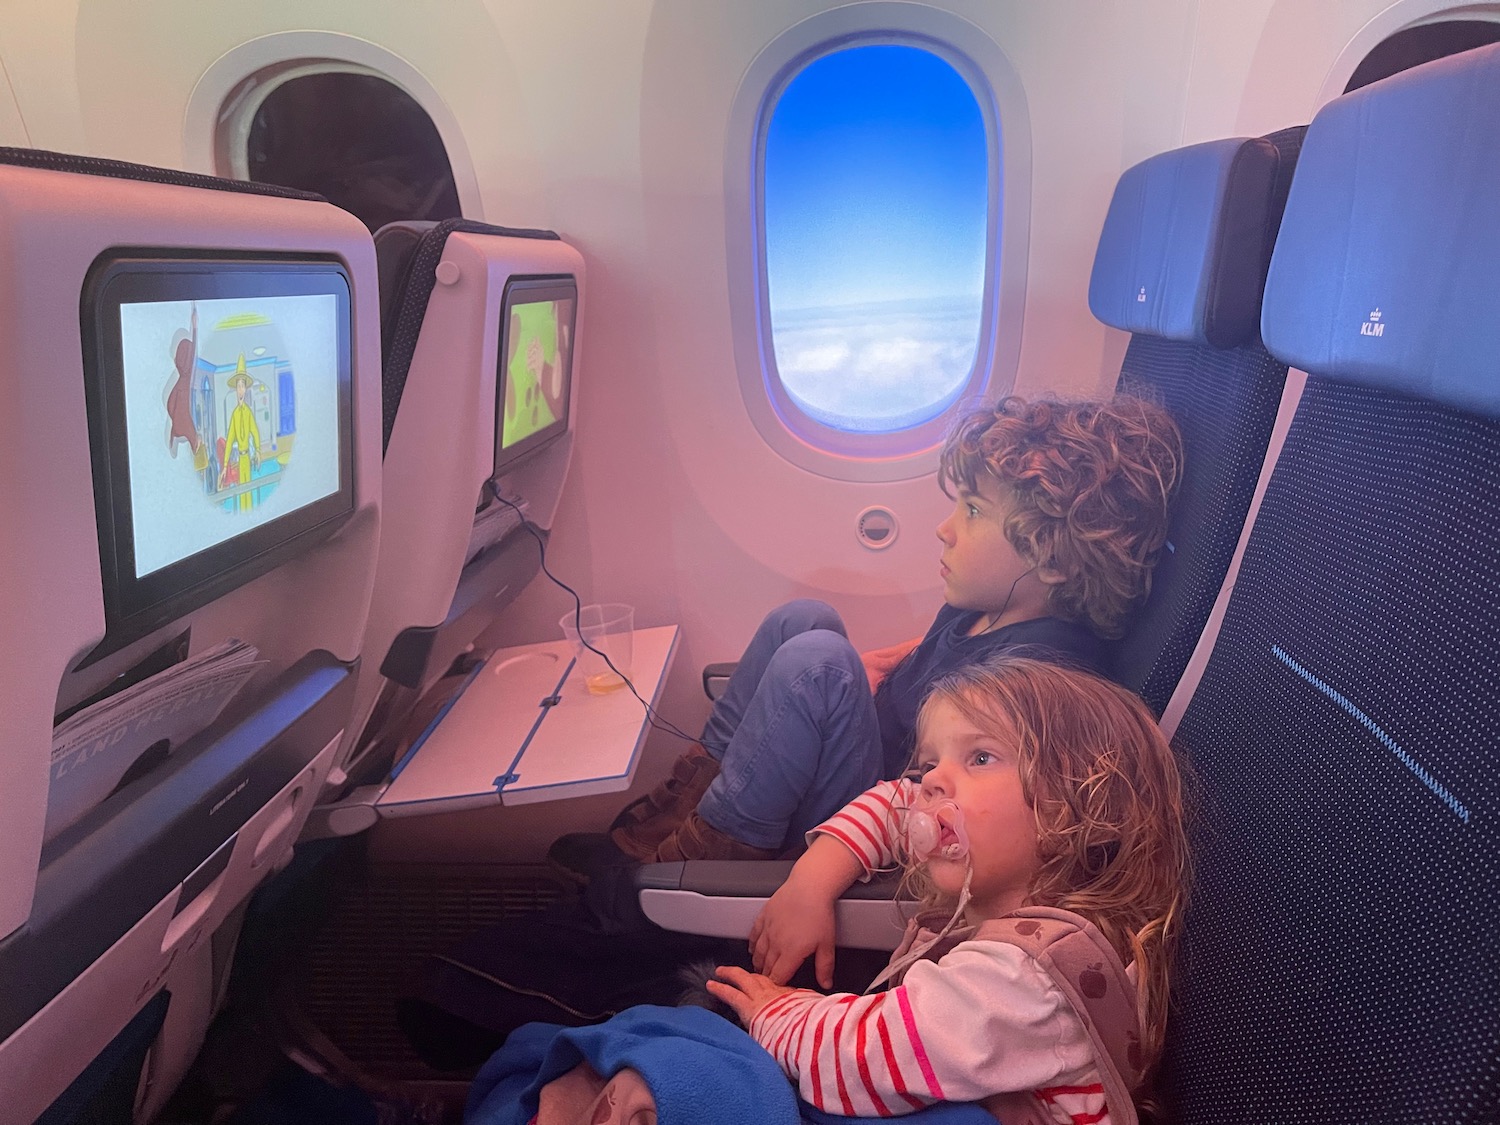 children sitting in an airplane with a screen on the side